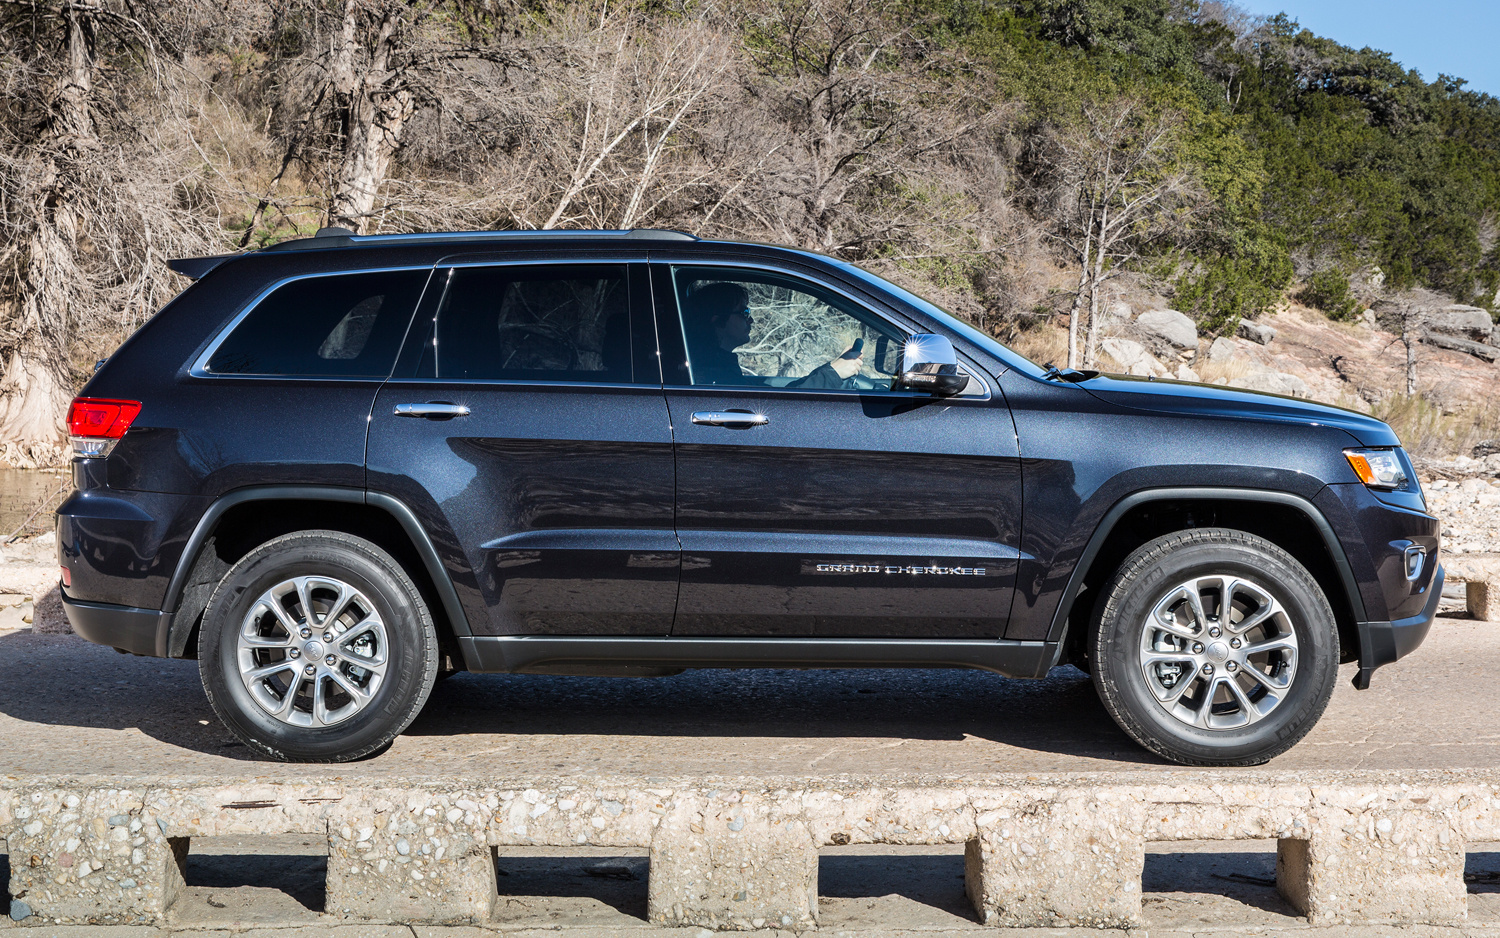 2014 Jeep Grand Cherokee Diesel Side View Photo Picture HD Wallpaper